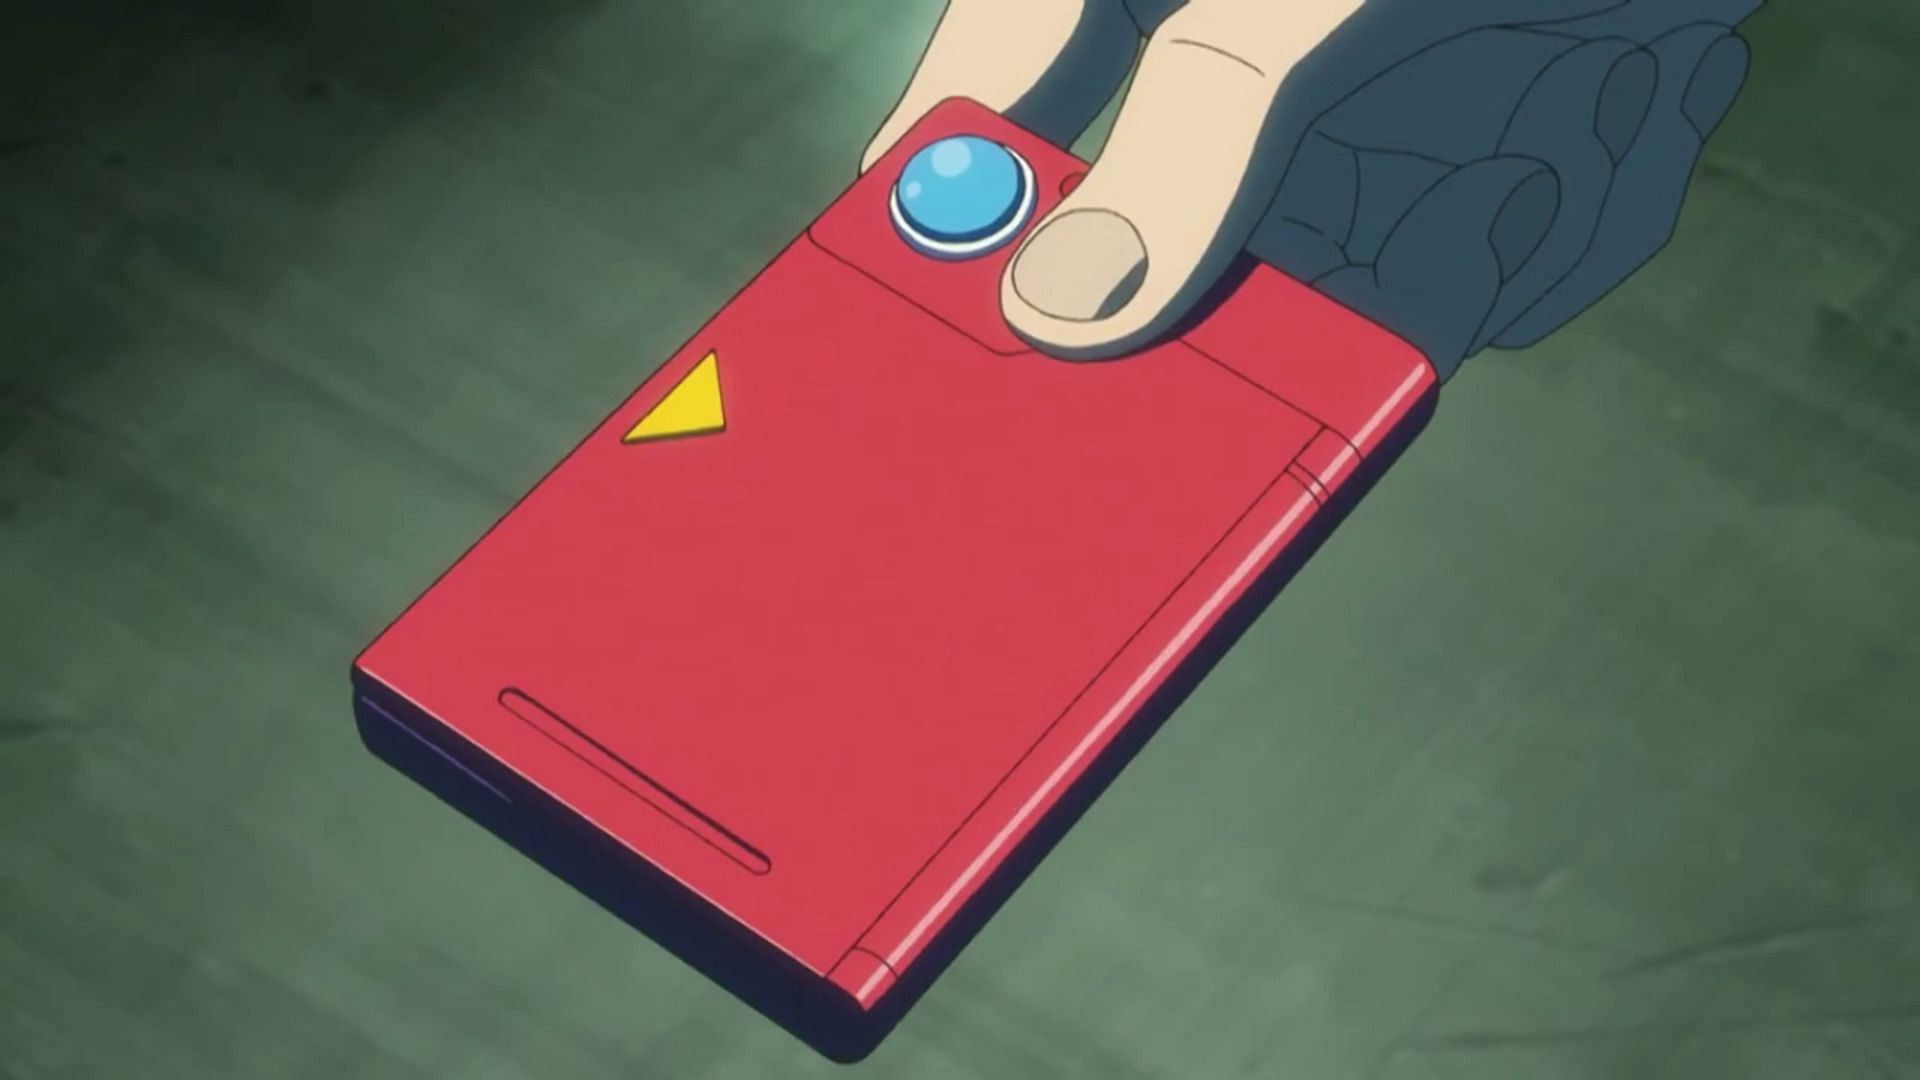 The Pokedex has been a staple of the Pokemon franchise since its very beginning (Image via The Pokemon Company)